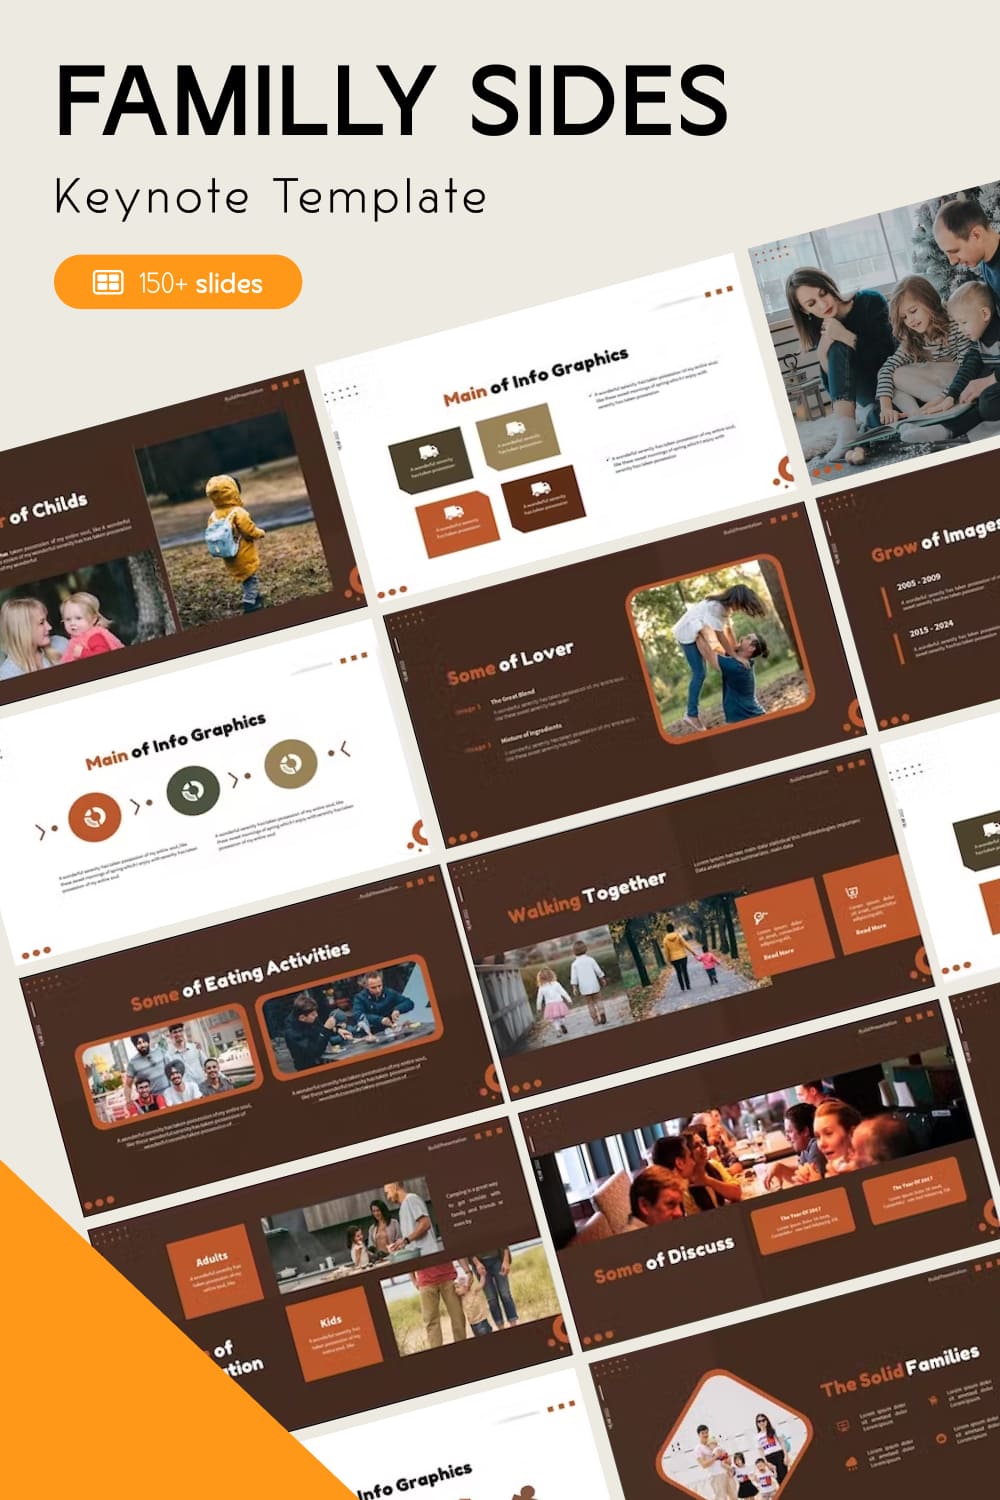 Family Pages | Keynote Template - Pinterest.